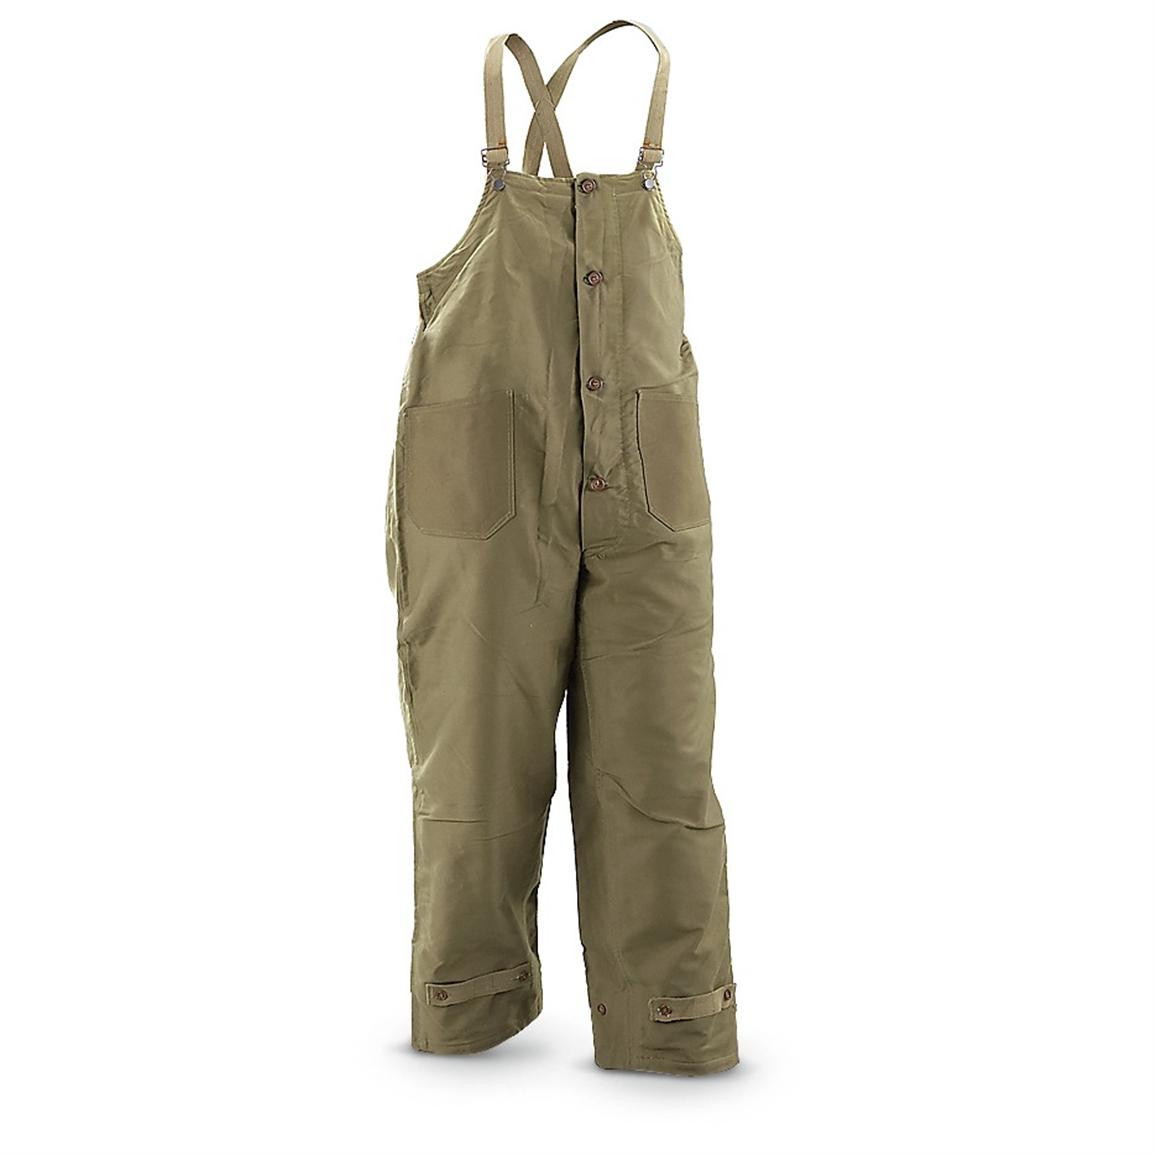 New Italian Military Surplus Deck Pants with Suspenders, Olive Drab ...